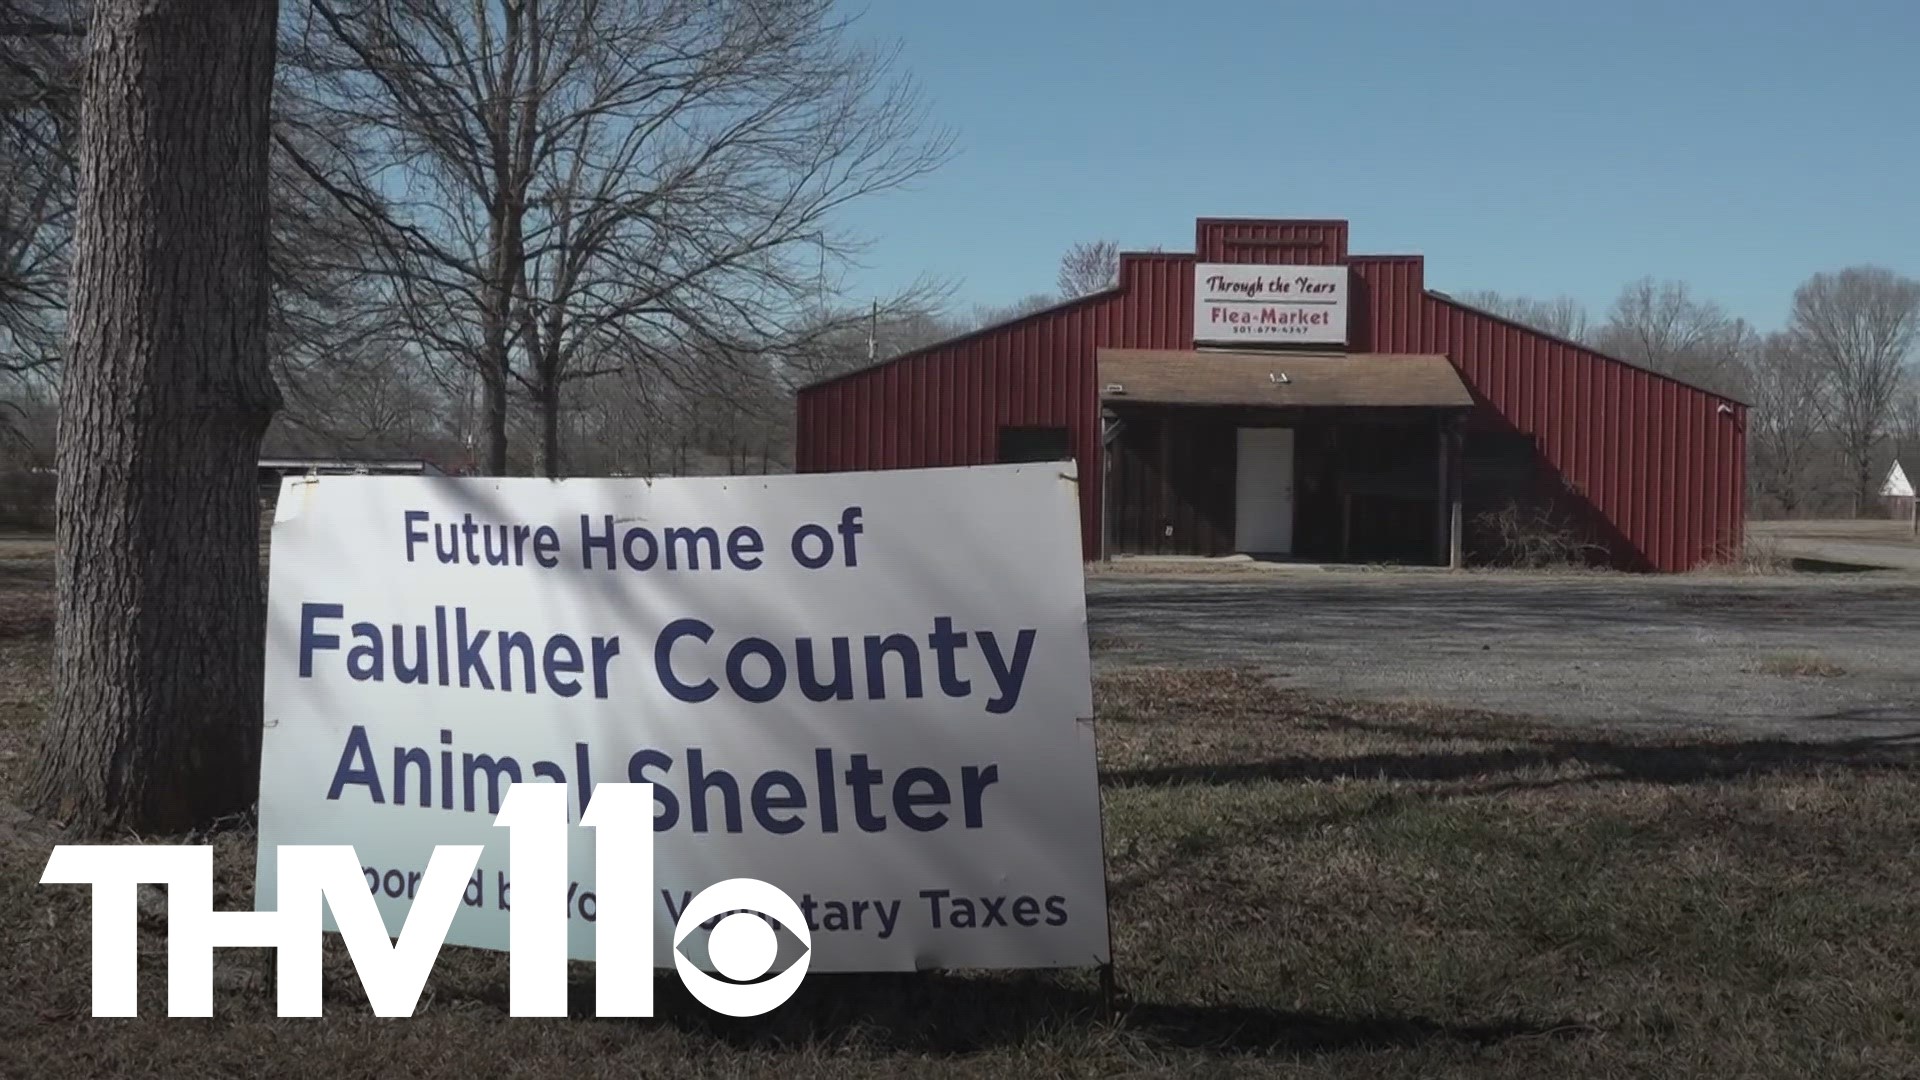 A new recommendation is on the table, and big decisions are expected to be made in the coming weeks regarding the long-awaited animal shelter in Faulkner County.